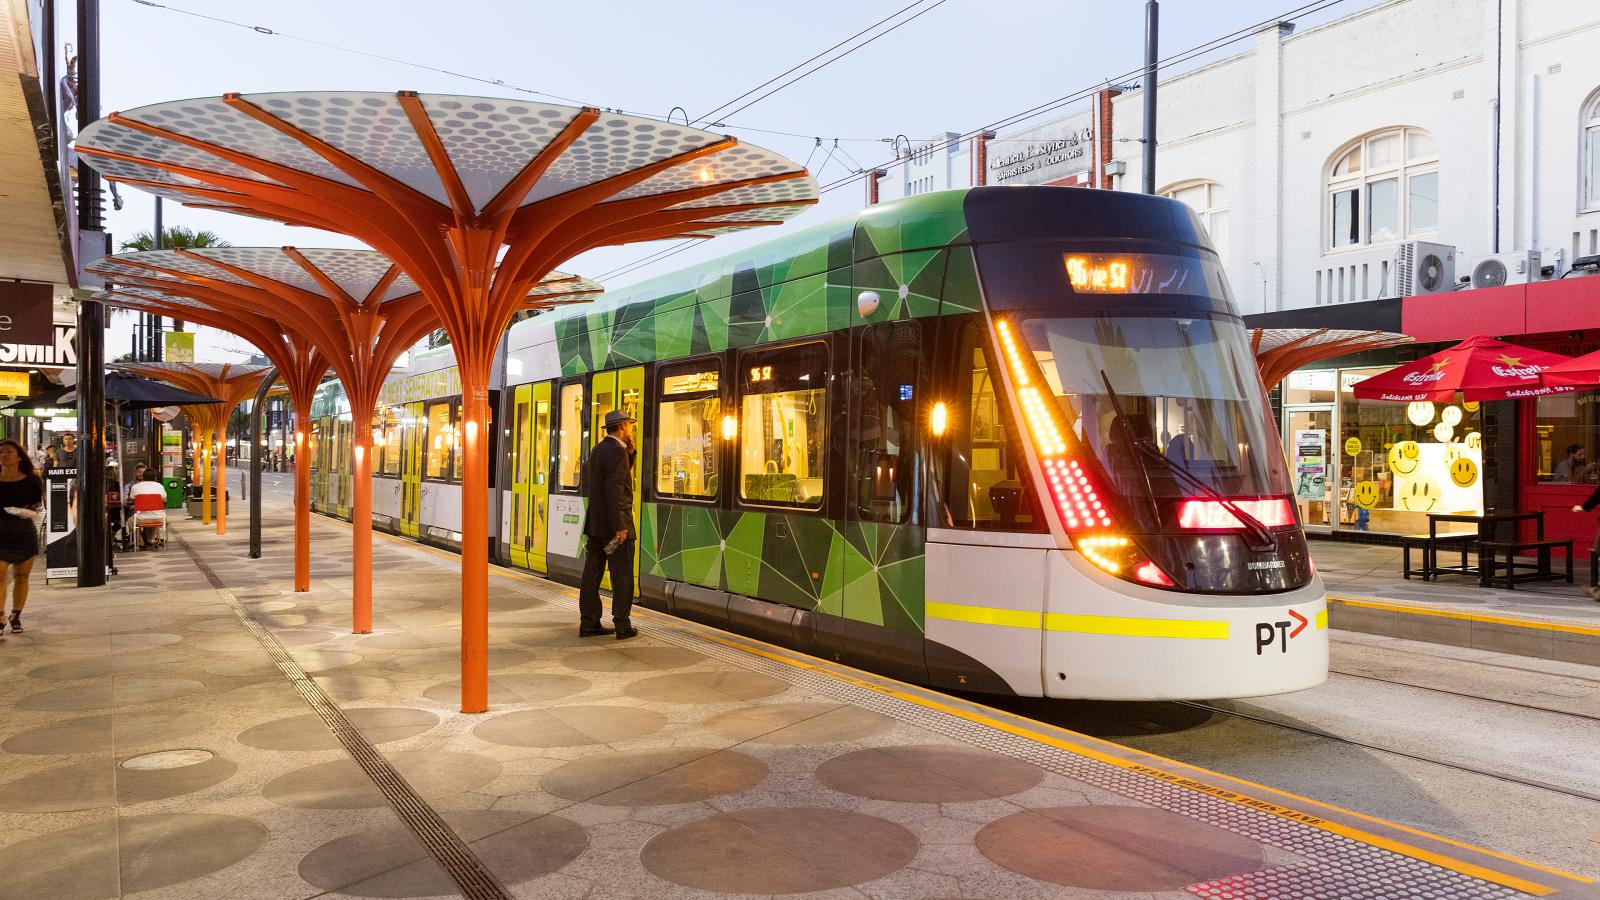 A modern tram with a green, geometric design is stopped at a platform in an urban area on St Kilda’s Acland Street. The station features unique, orange, umbrella-like structures. A person in a black jacket is stepping onto the tram. Nearby are storefronts and a red awning with additional seating.